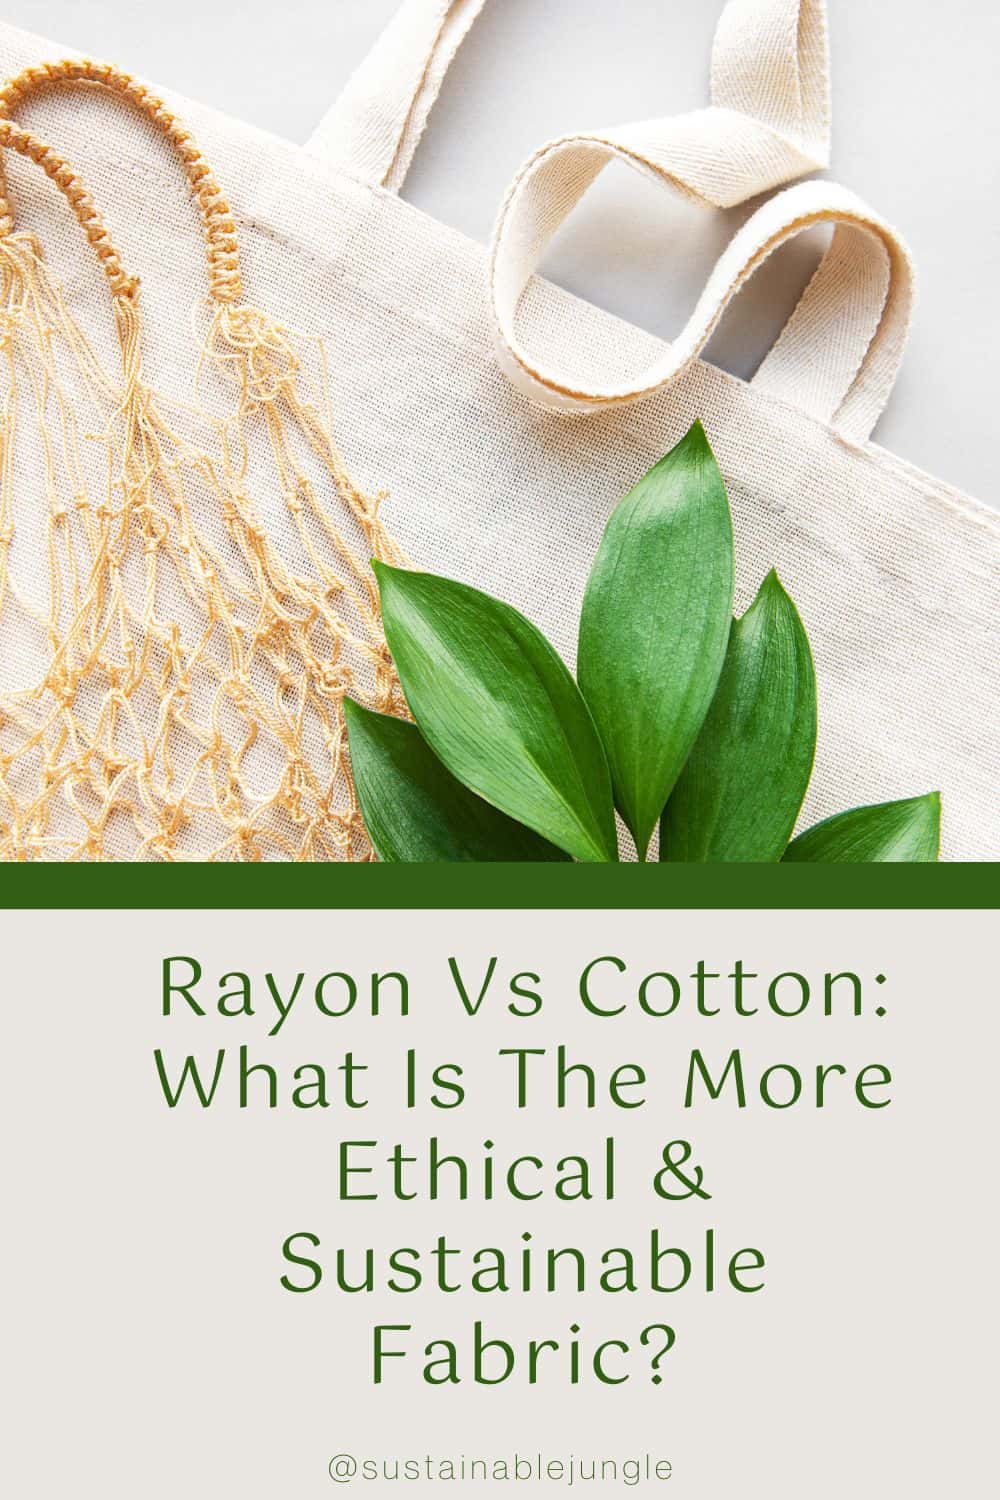 Rayon vs Cotton: What is the Difference Between the Two Popular Materials? Image by Olena Rudo via Canva Pro #rayonvscotton #cottonvsrayon #rayonfabricvscotton #bamboorayonvscotton #rayonvspolystervscotton #sustainablejungle